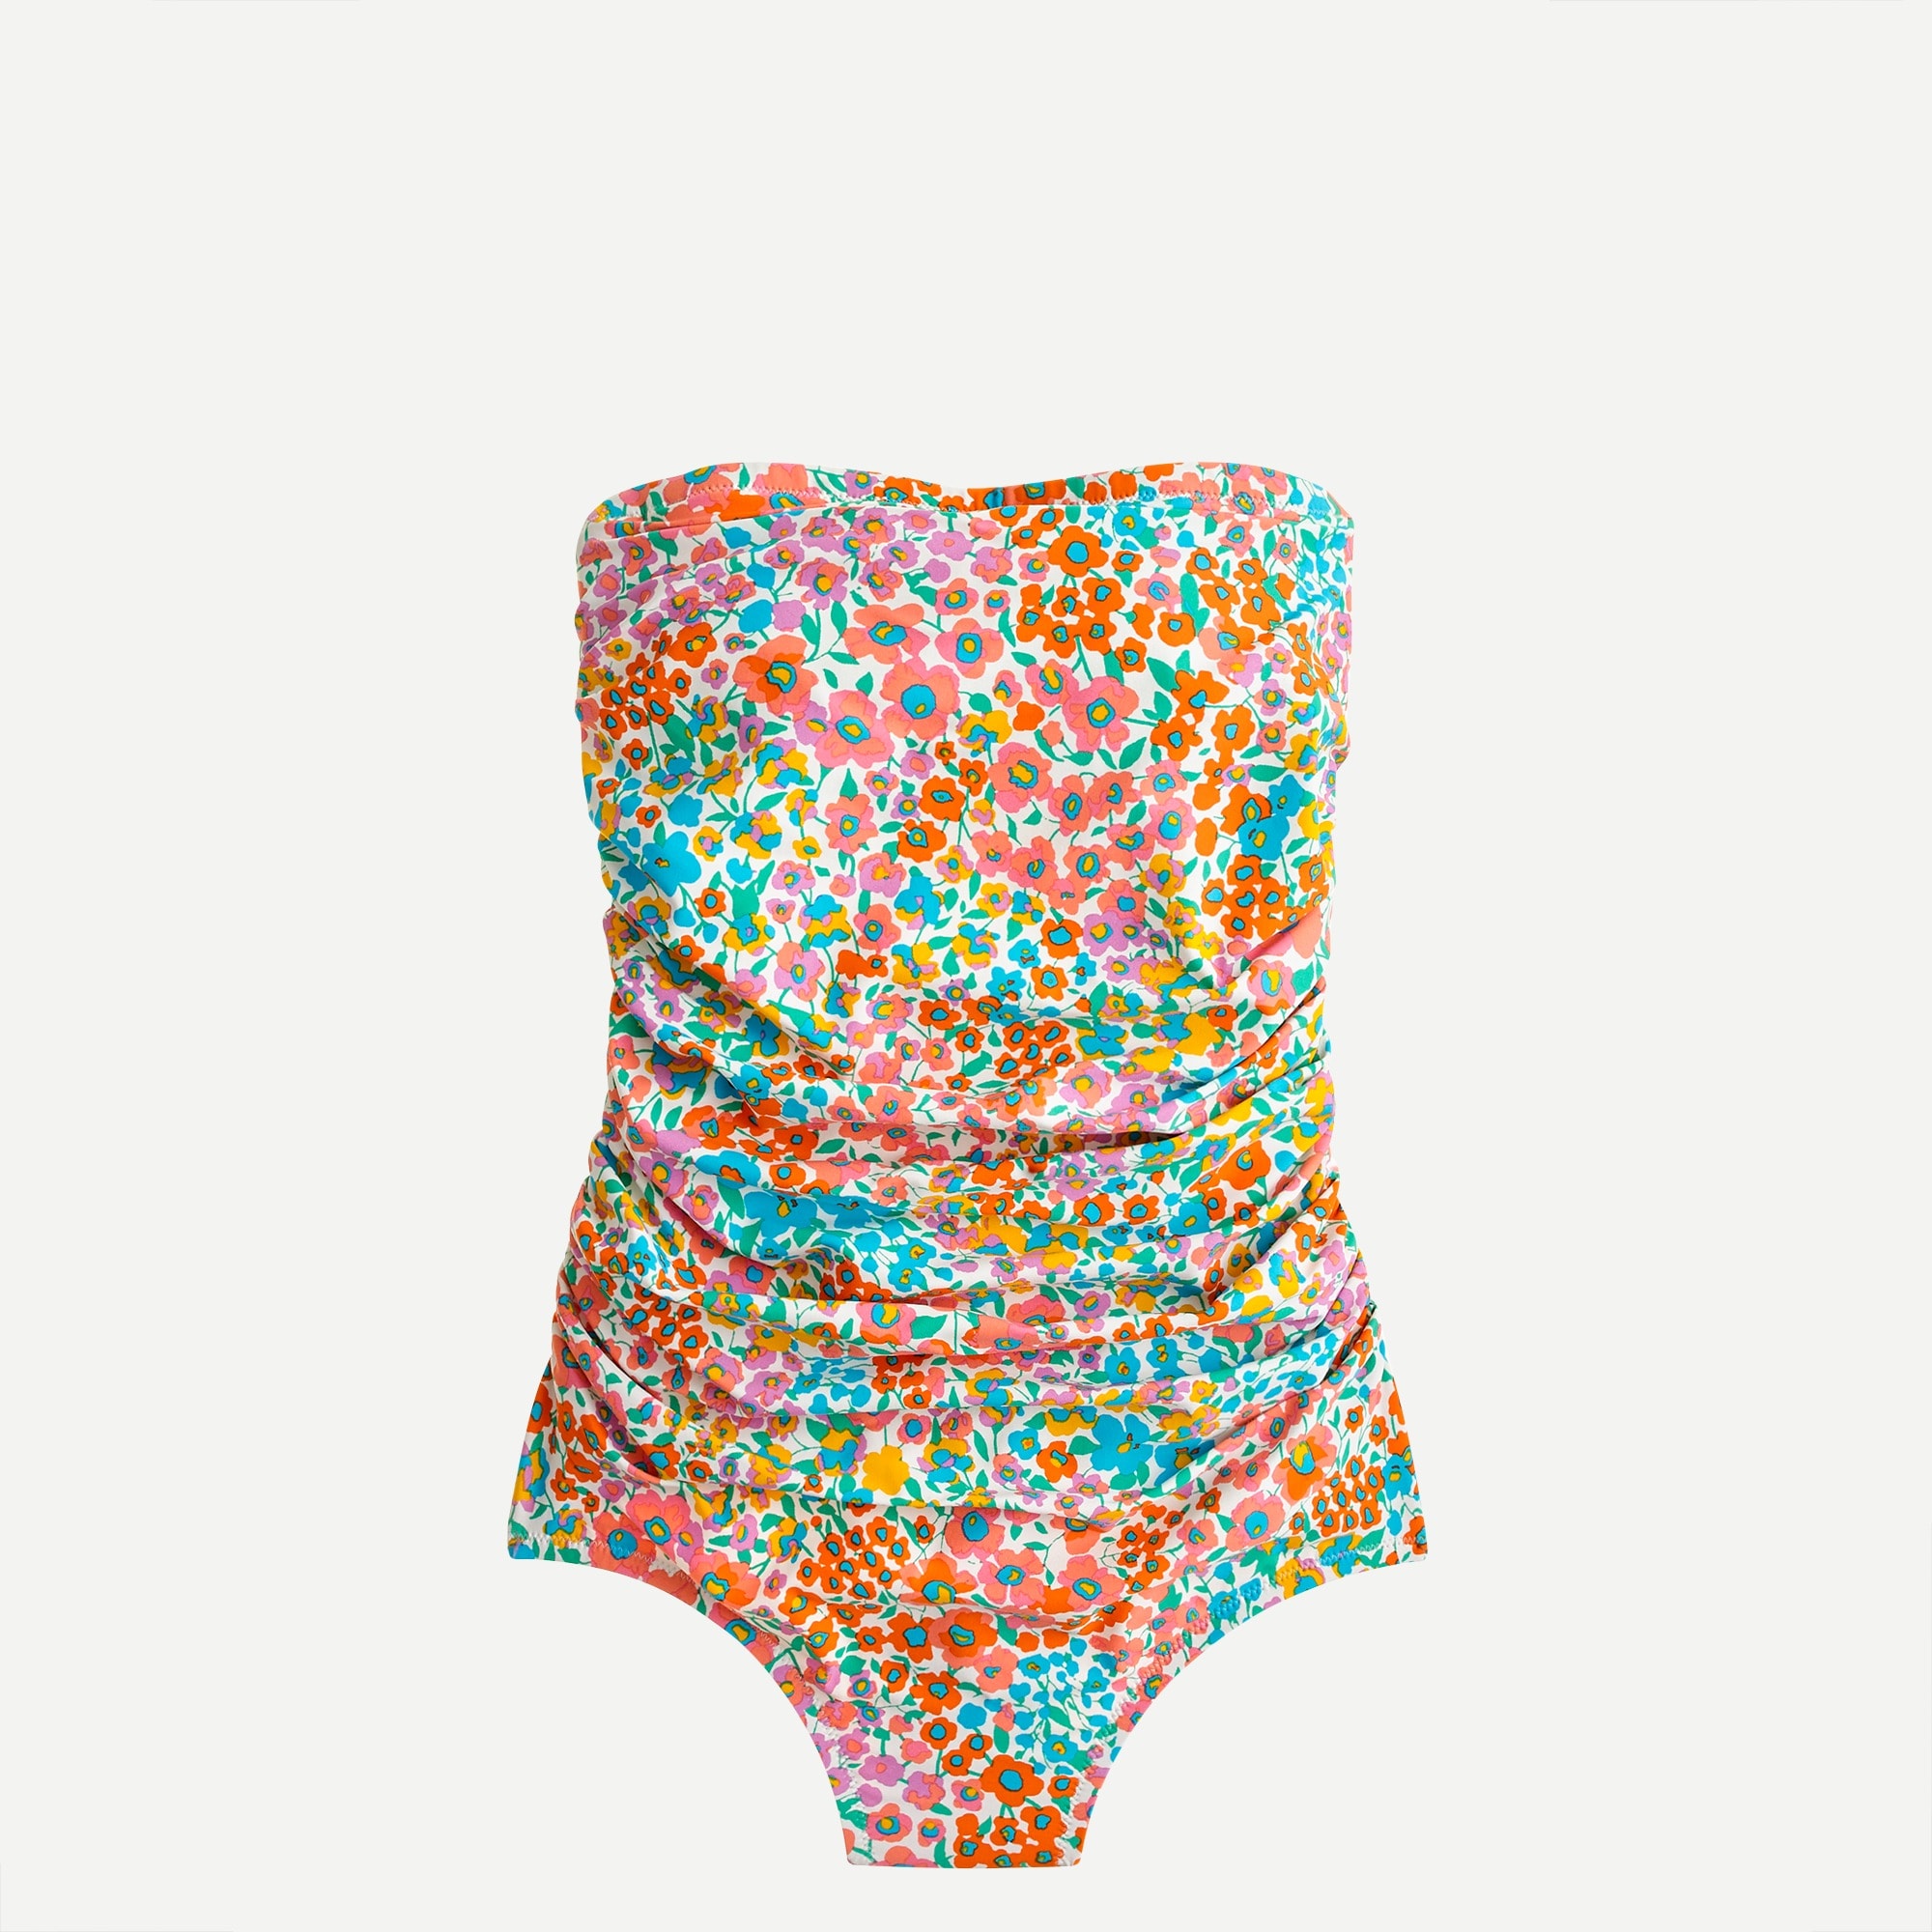 J Crew Ruched Bandeau One Piece In Rainbow Blooms For Women